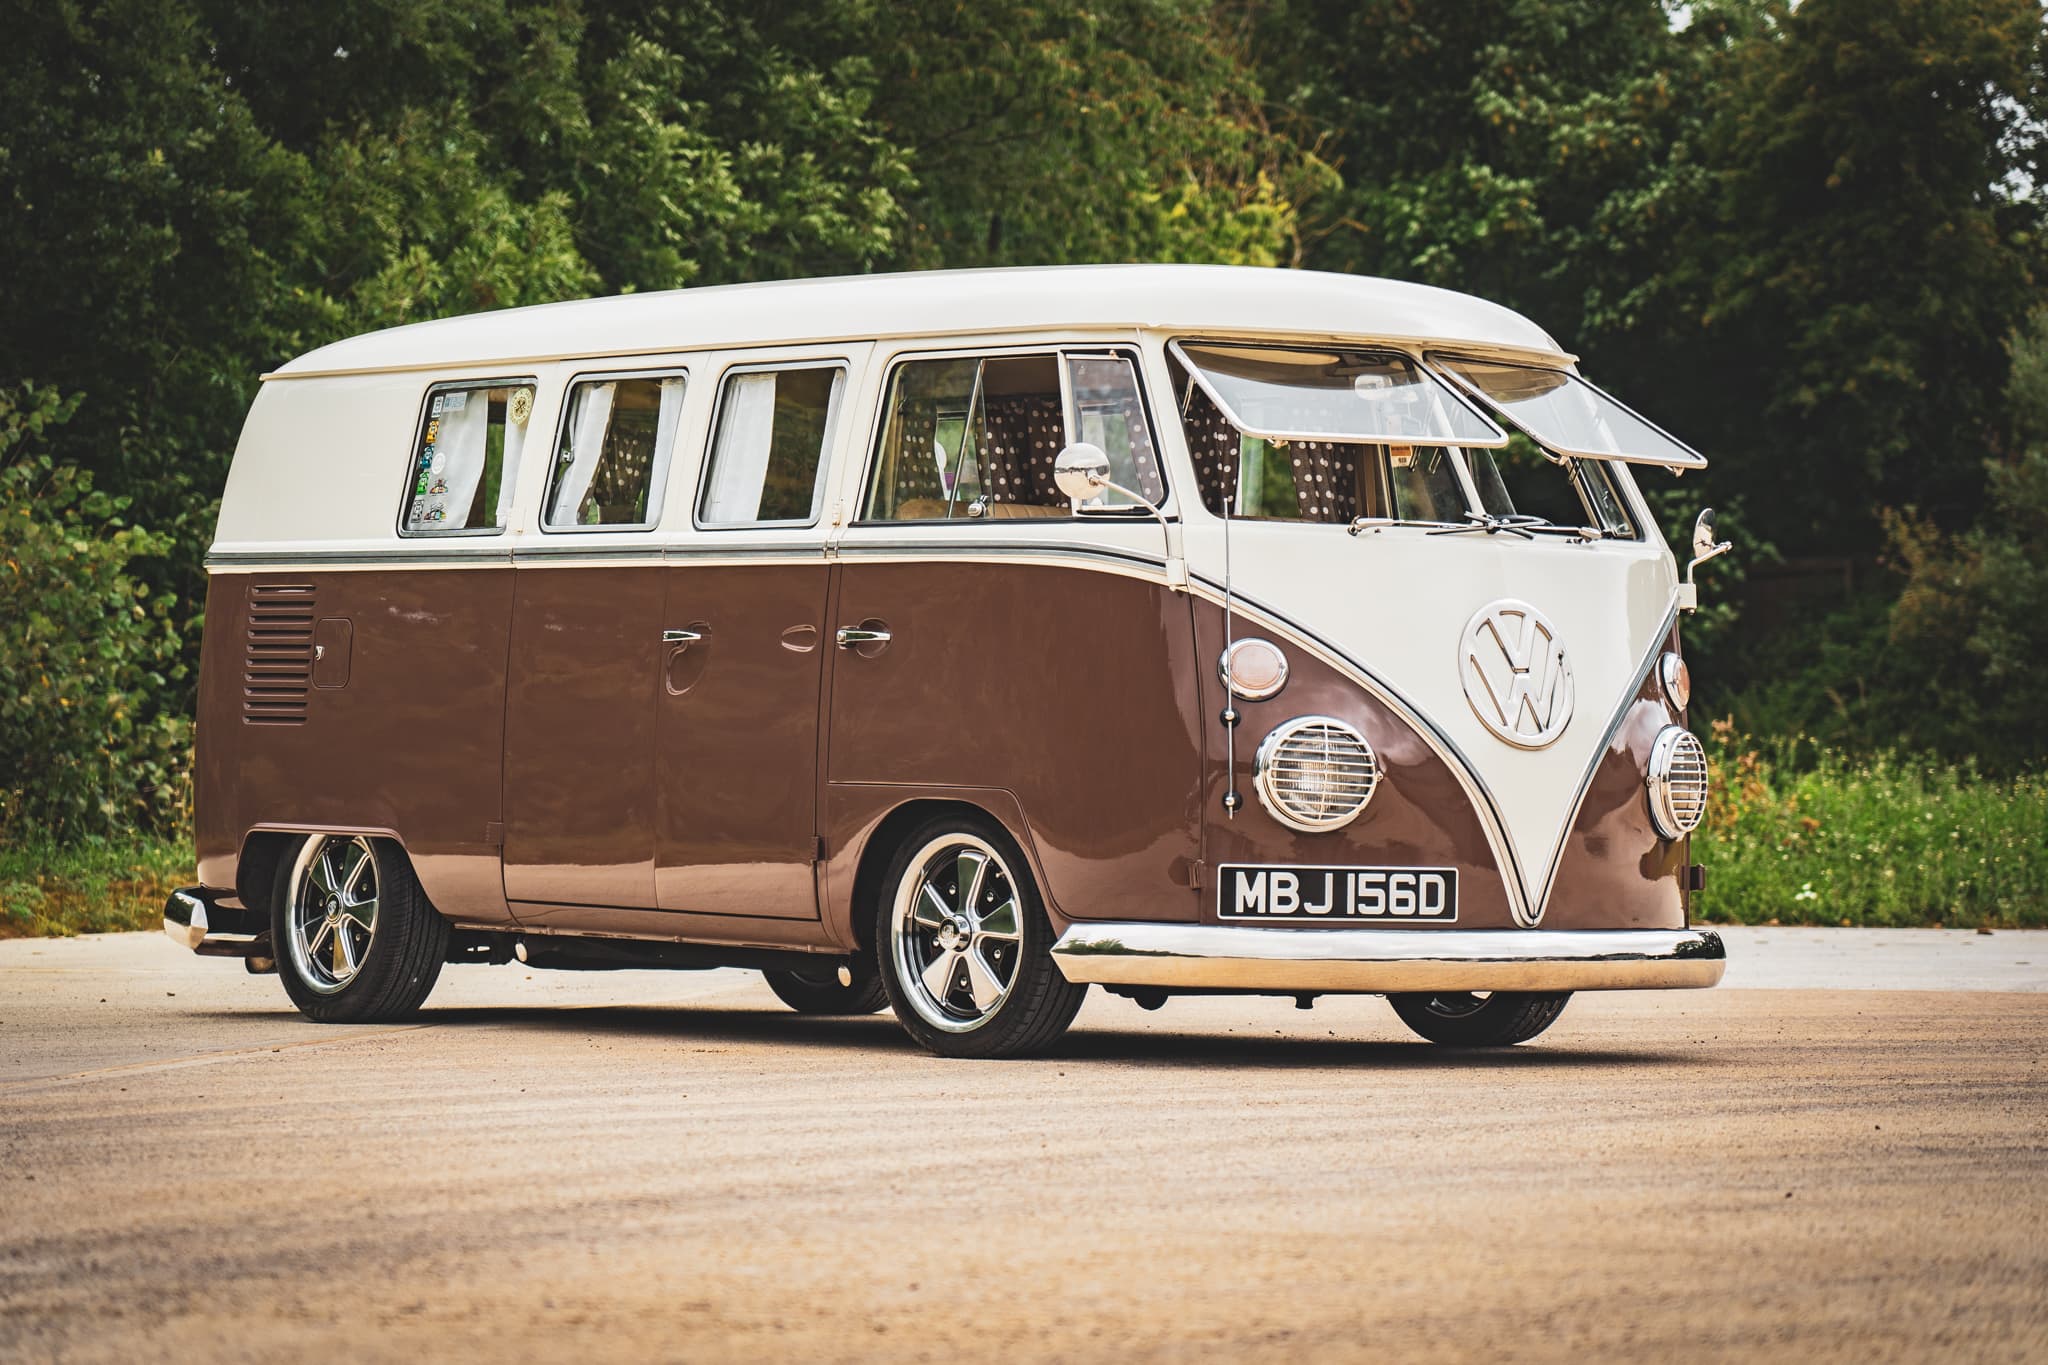 Coco the chocolate Dream Bus - 1966 VW Splitscreen - Nutria Brown and Pastel white - 1835cc - Twin carbs - 17th August